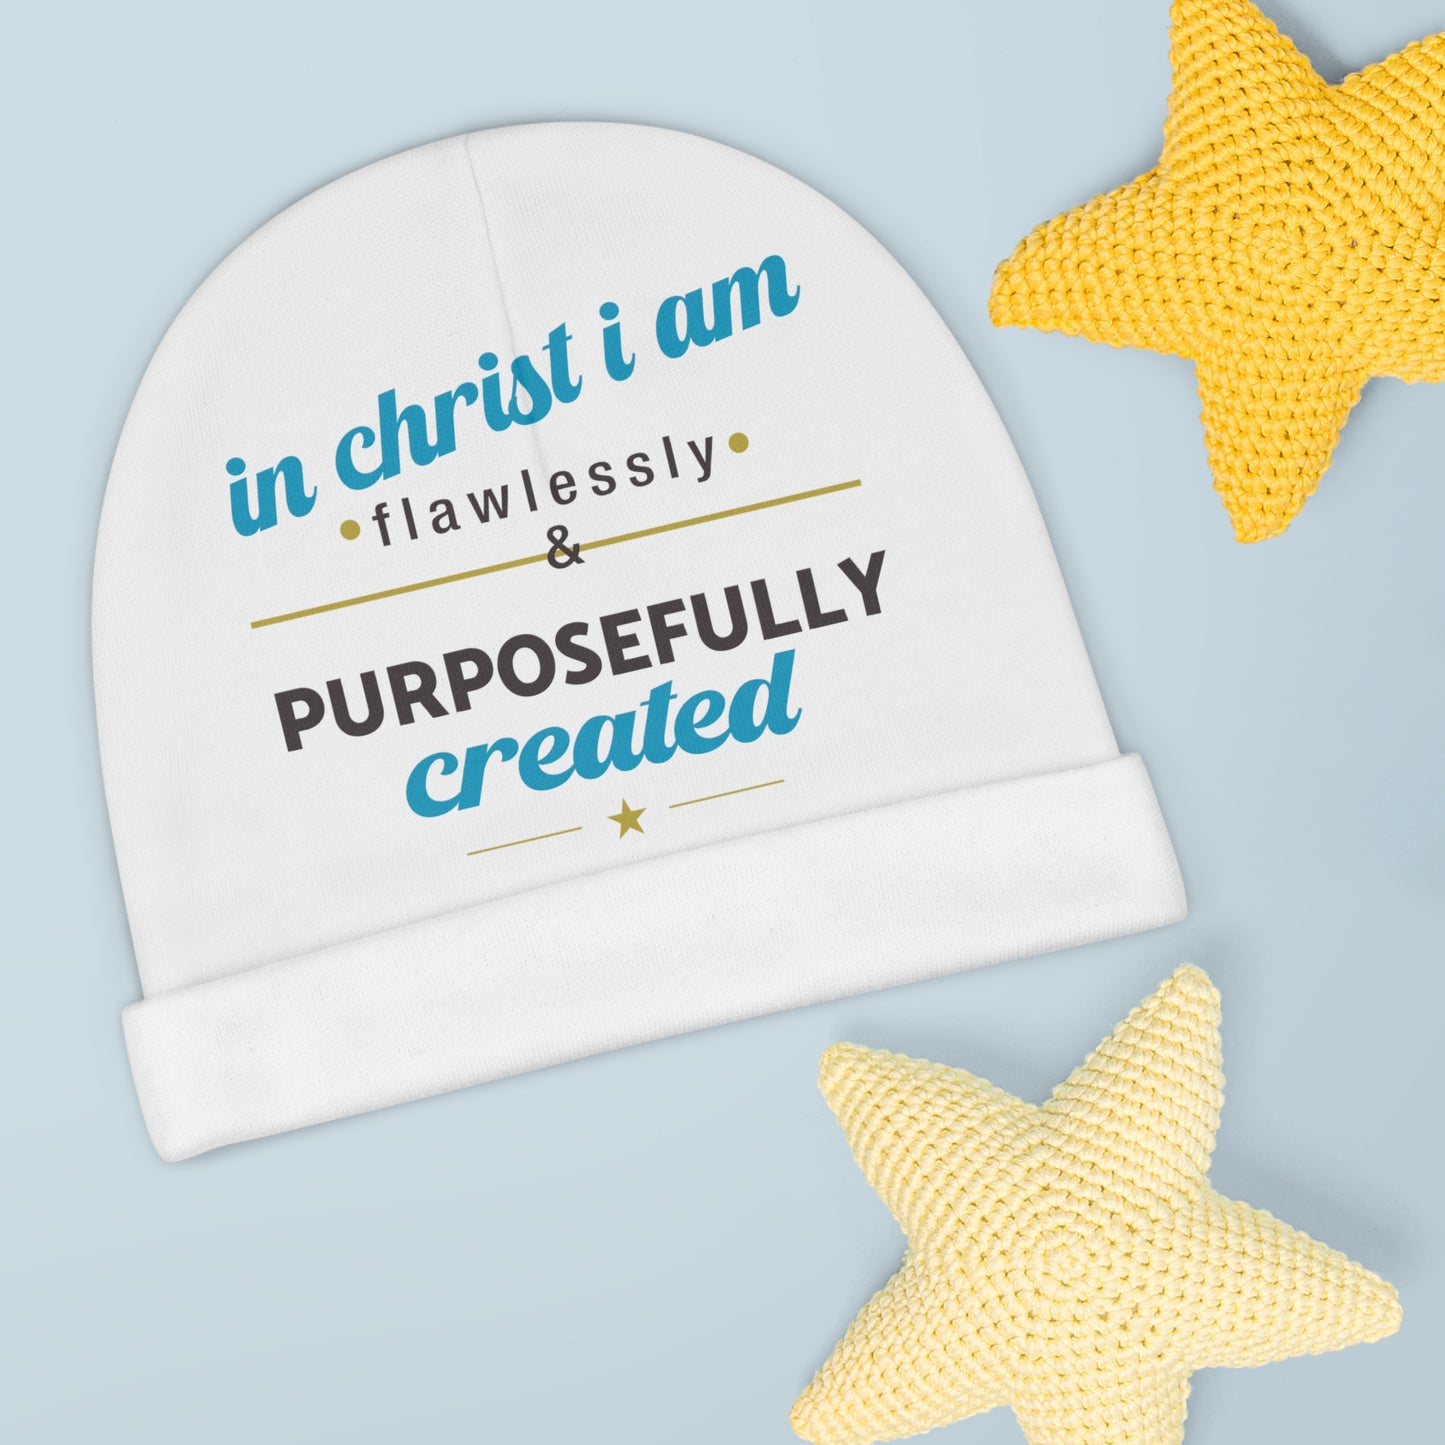 In Christ I Am Flawlessly & Purposefully Created Baby Beanie (AOP) Printify